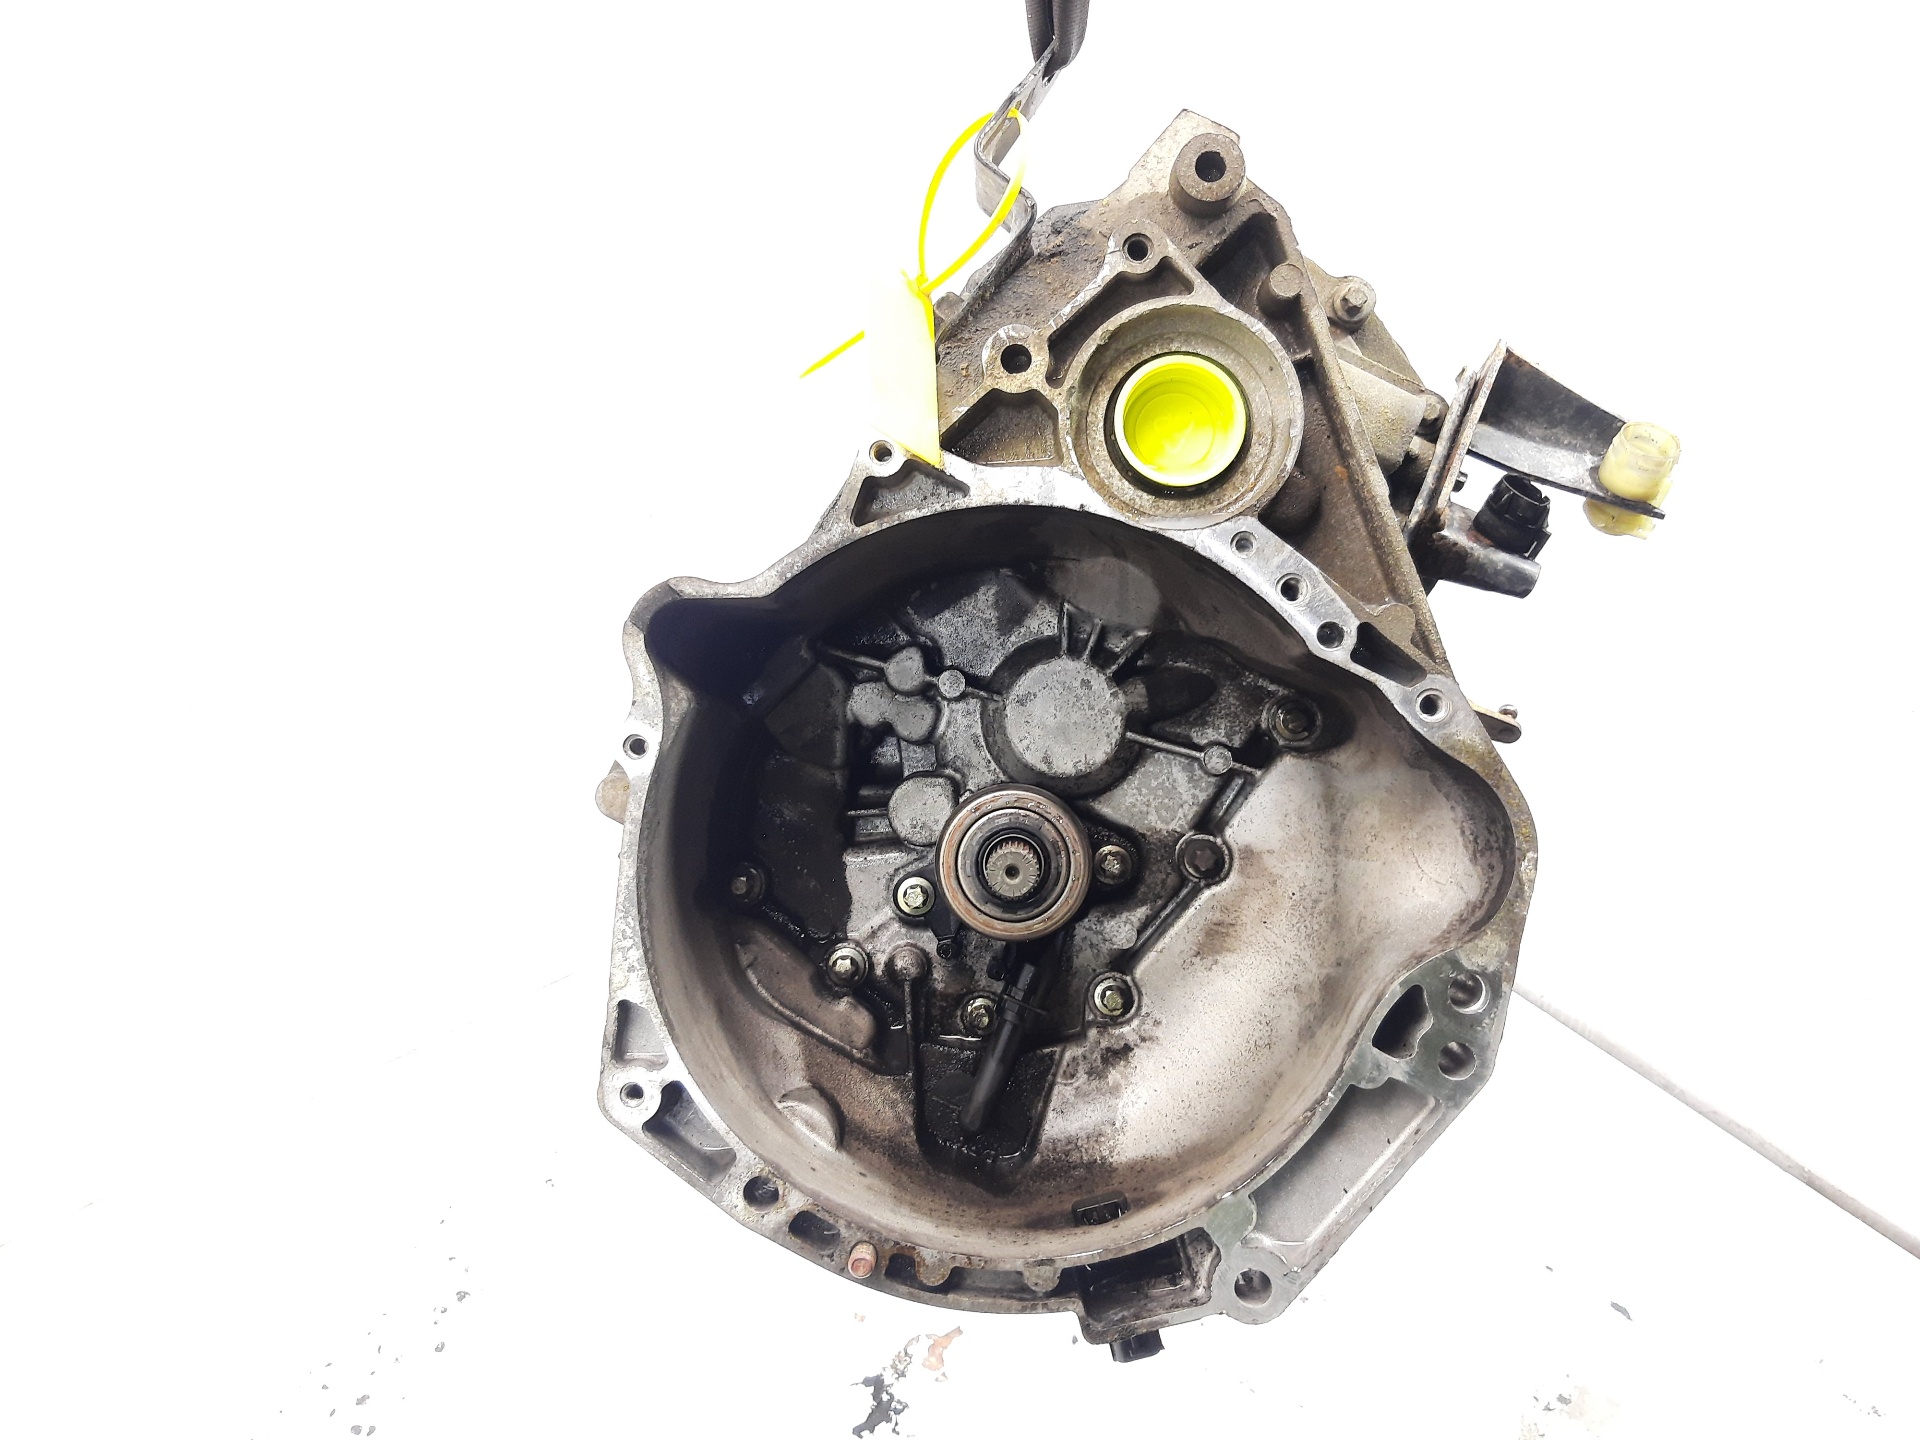 NISSAN Note 1 generation (2005-2014) Gearbox JH3103, 5VELOCIDADES 24154029